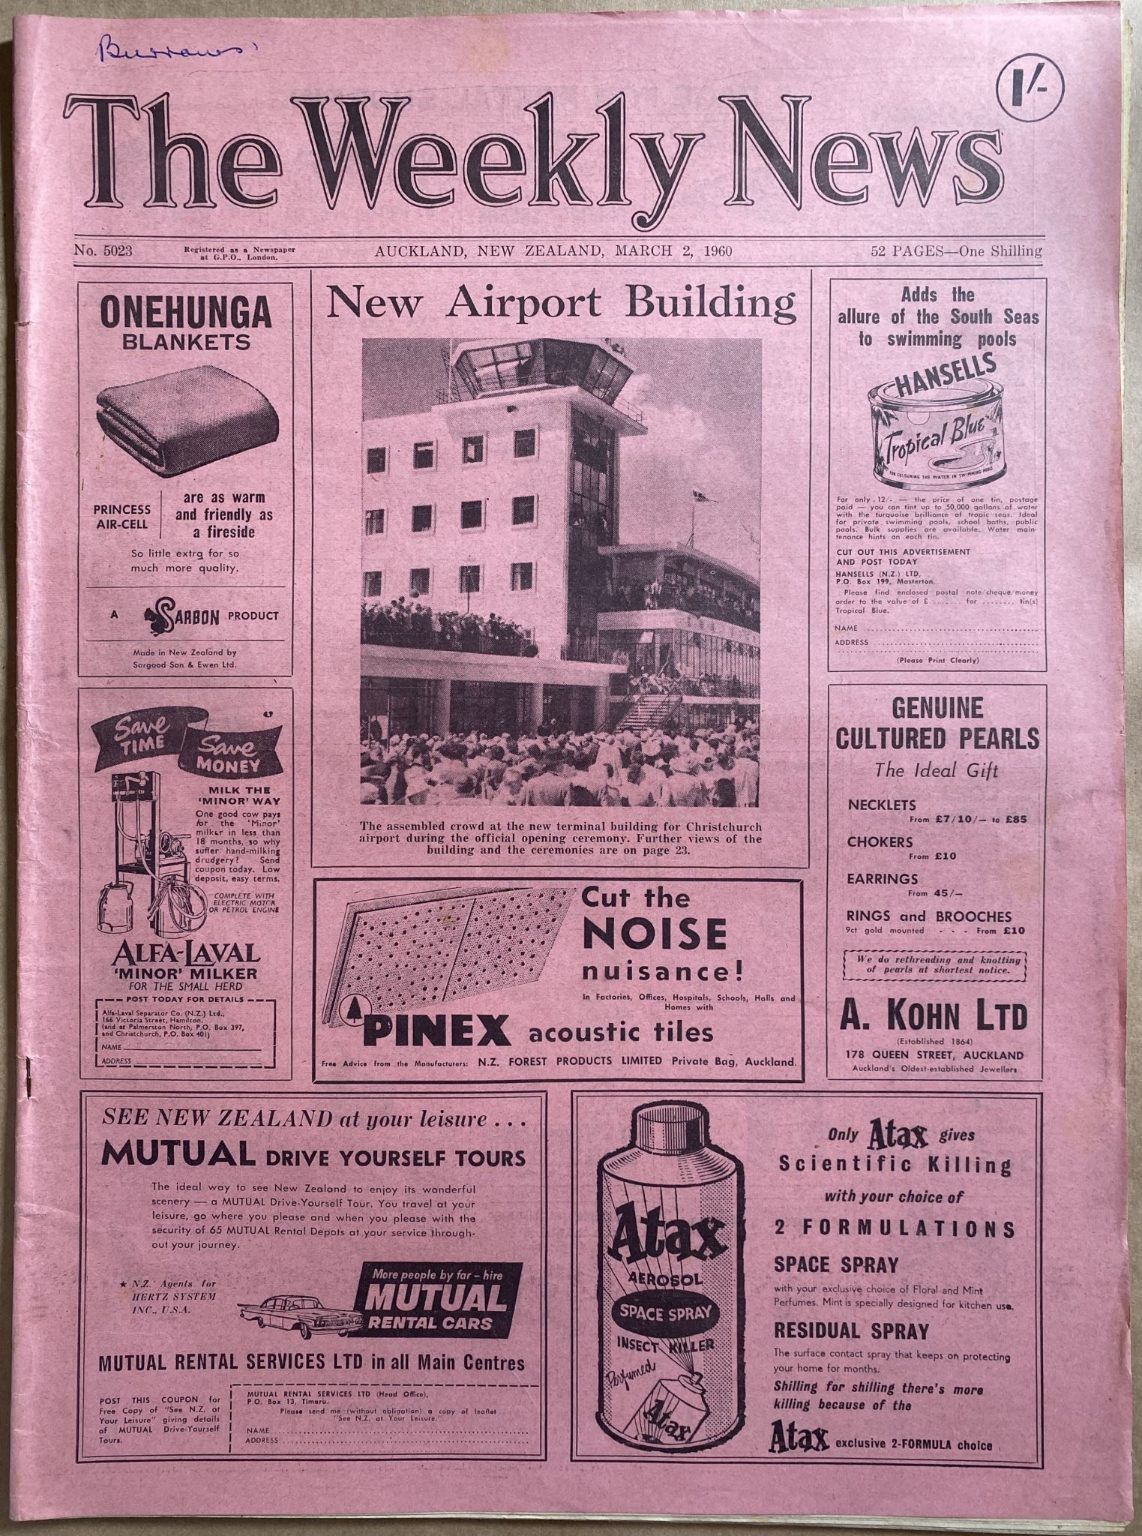 OLD NEWSPAPER: The Weekly News, No. 5023, 2 March 1960